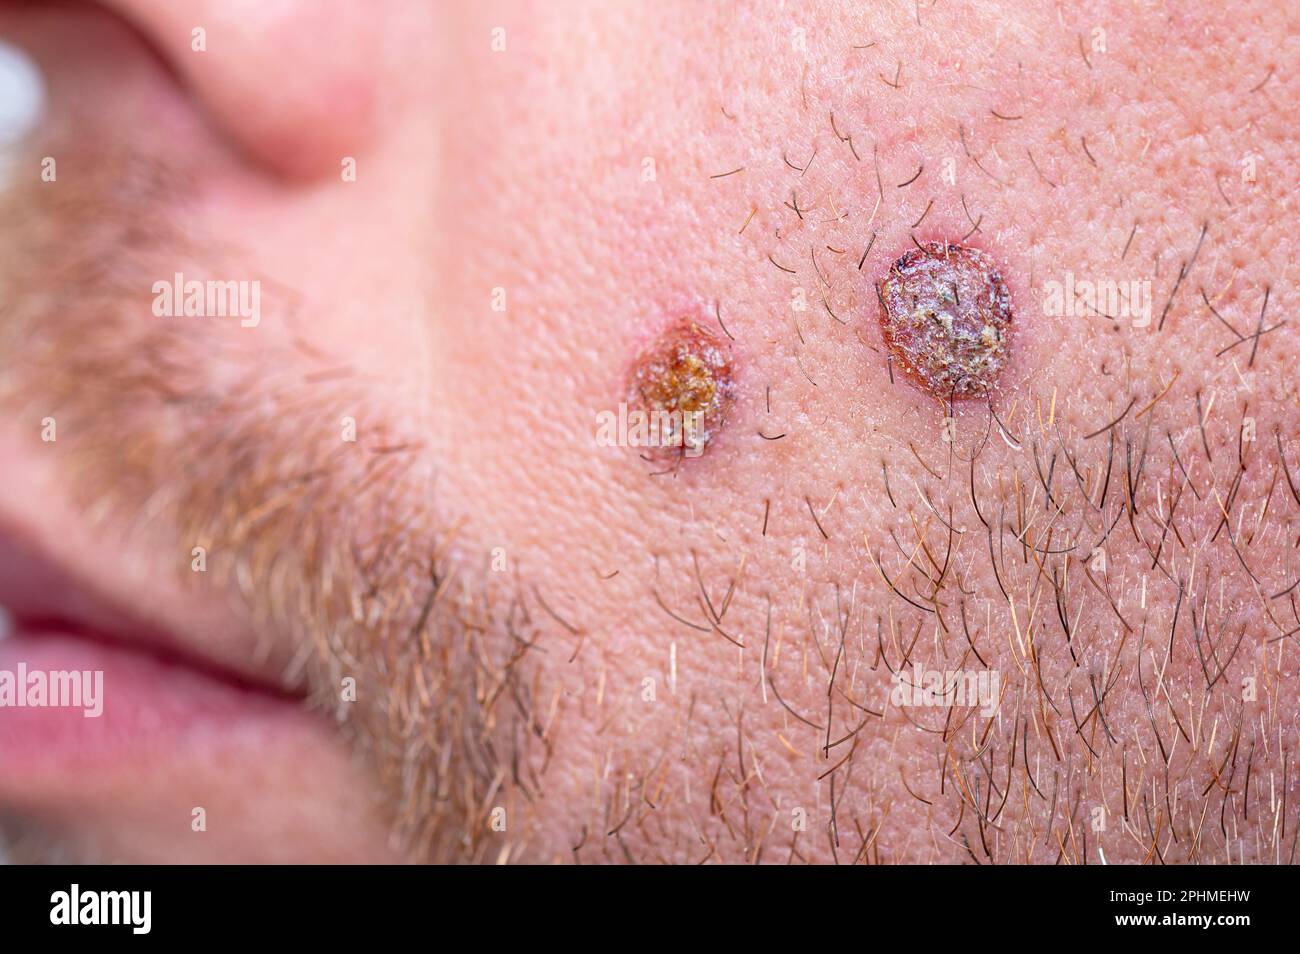 Close-up of wound with scab on the face, selective focus Stock Photo